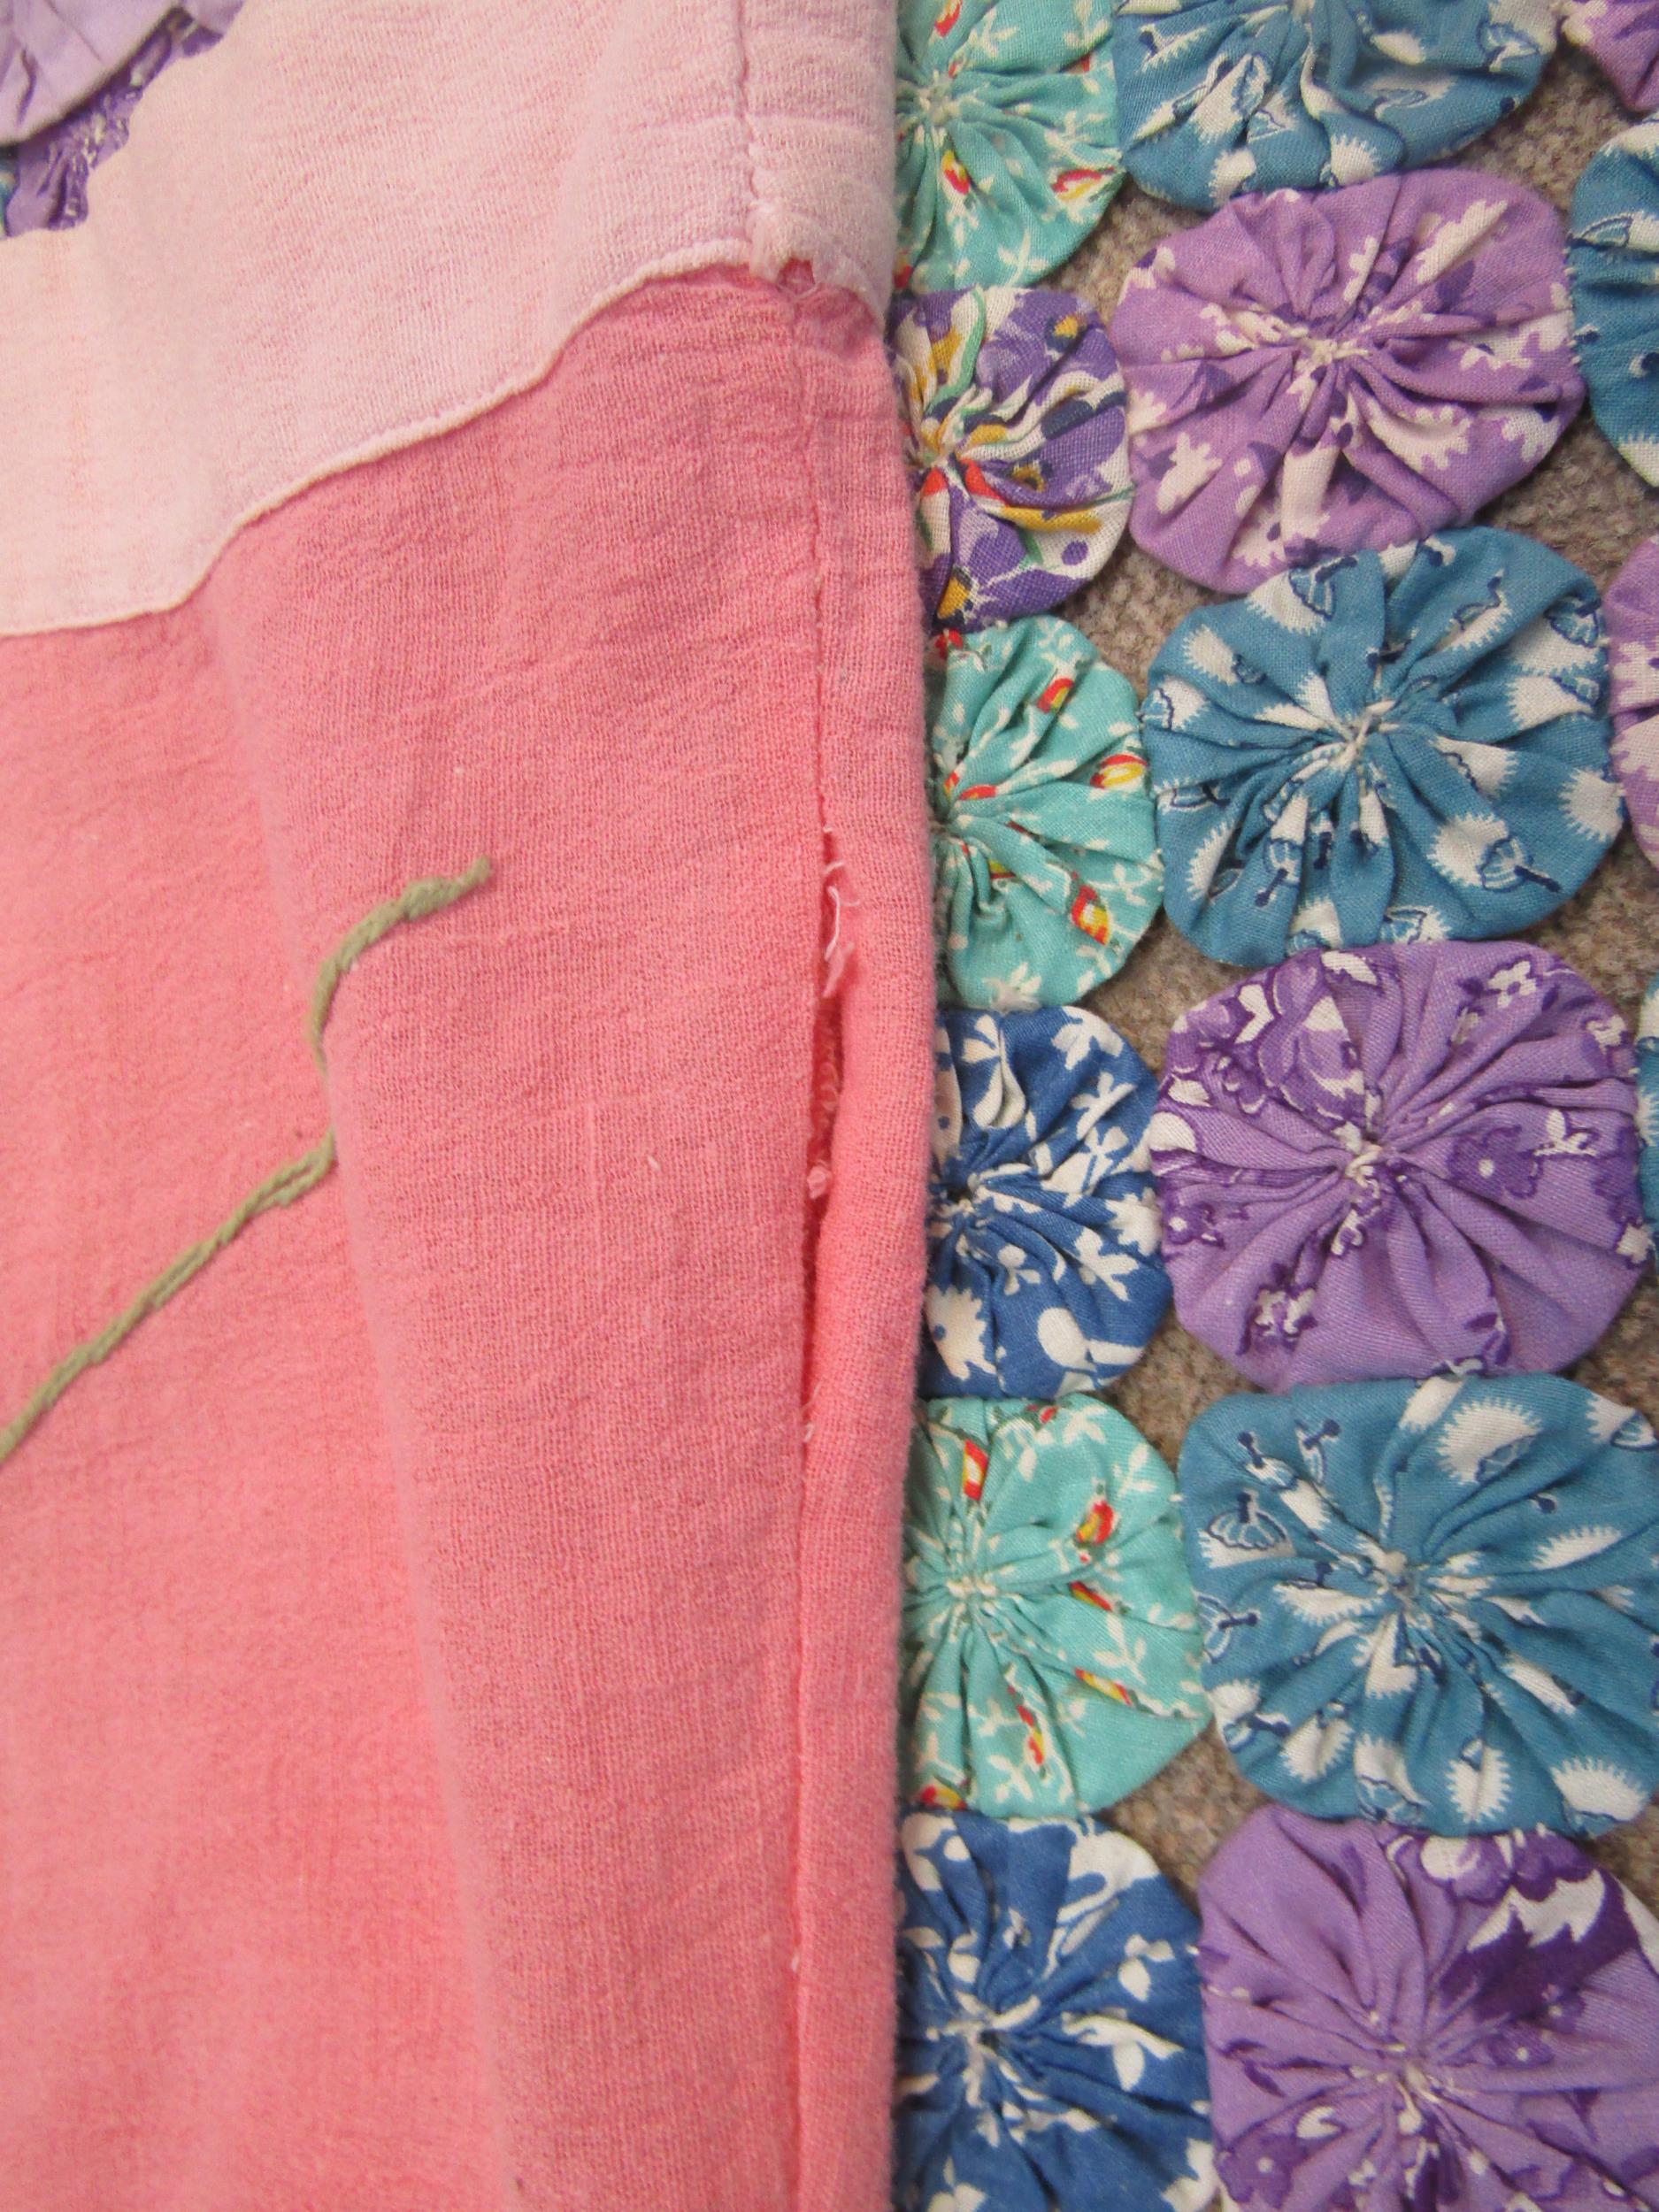 Two early 20th Century kimono style dressing gowns in pink, with hand embroidered floral detail - Image 2 of 4